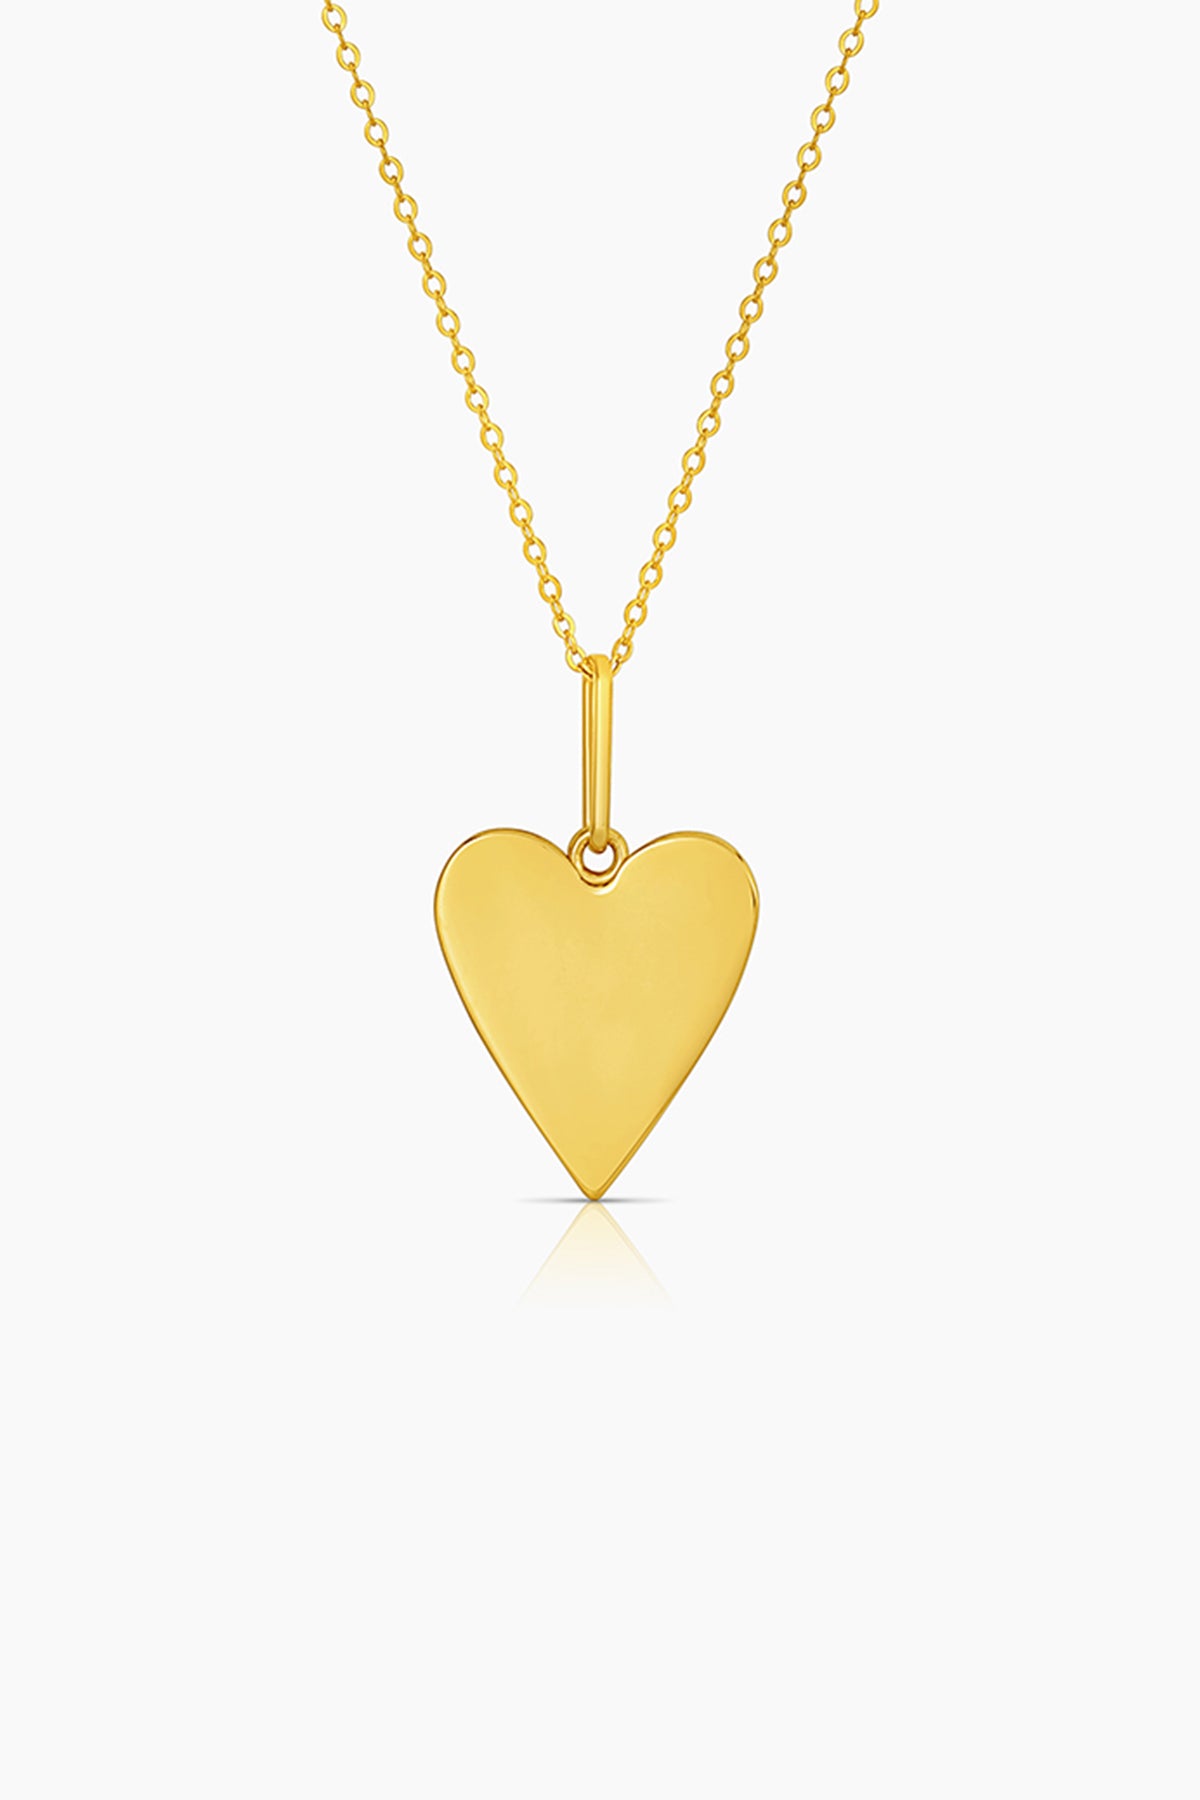 A AMAYA HEART NECKLACE BY Thatch on a white background.-35526305120449